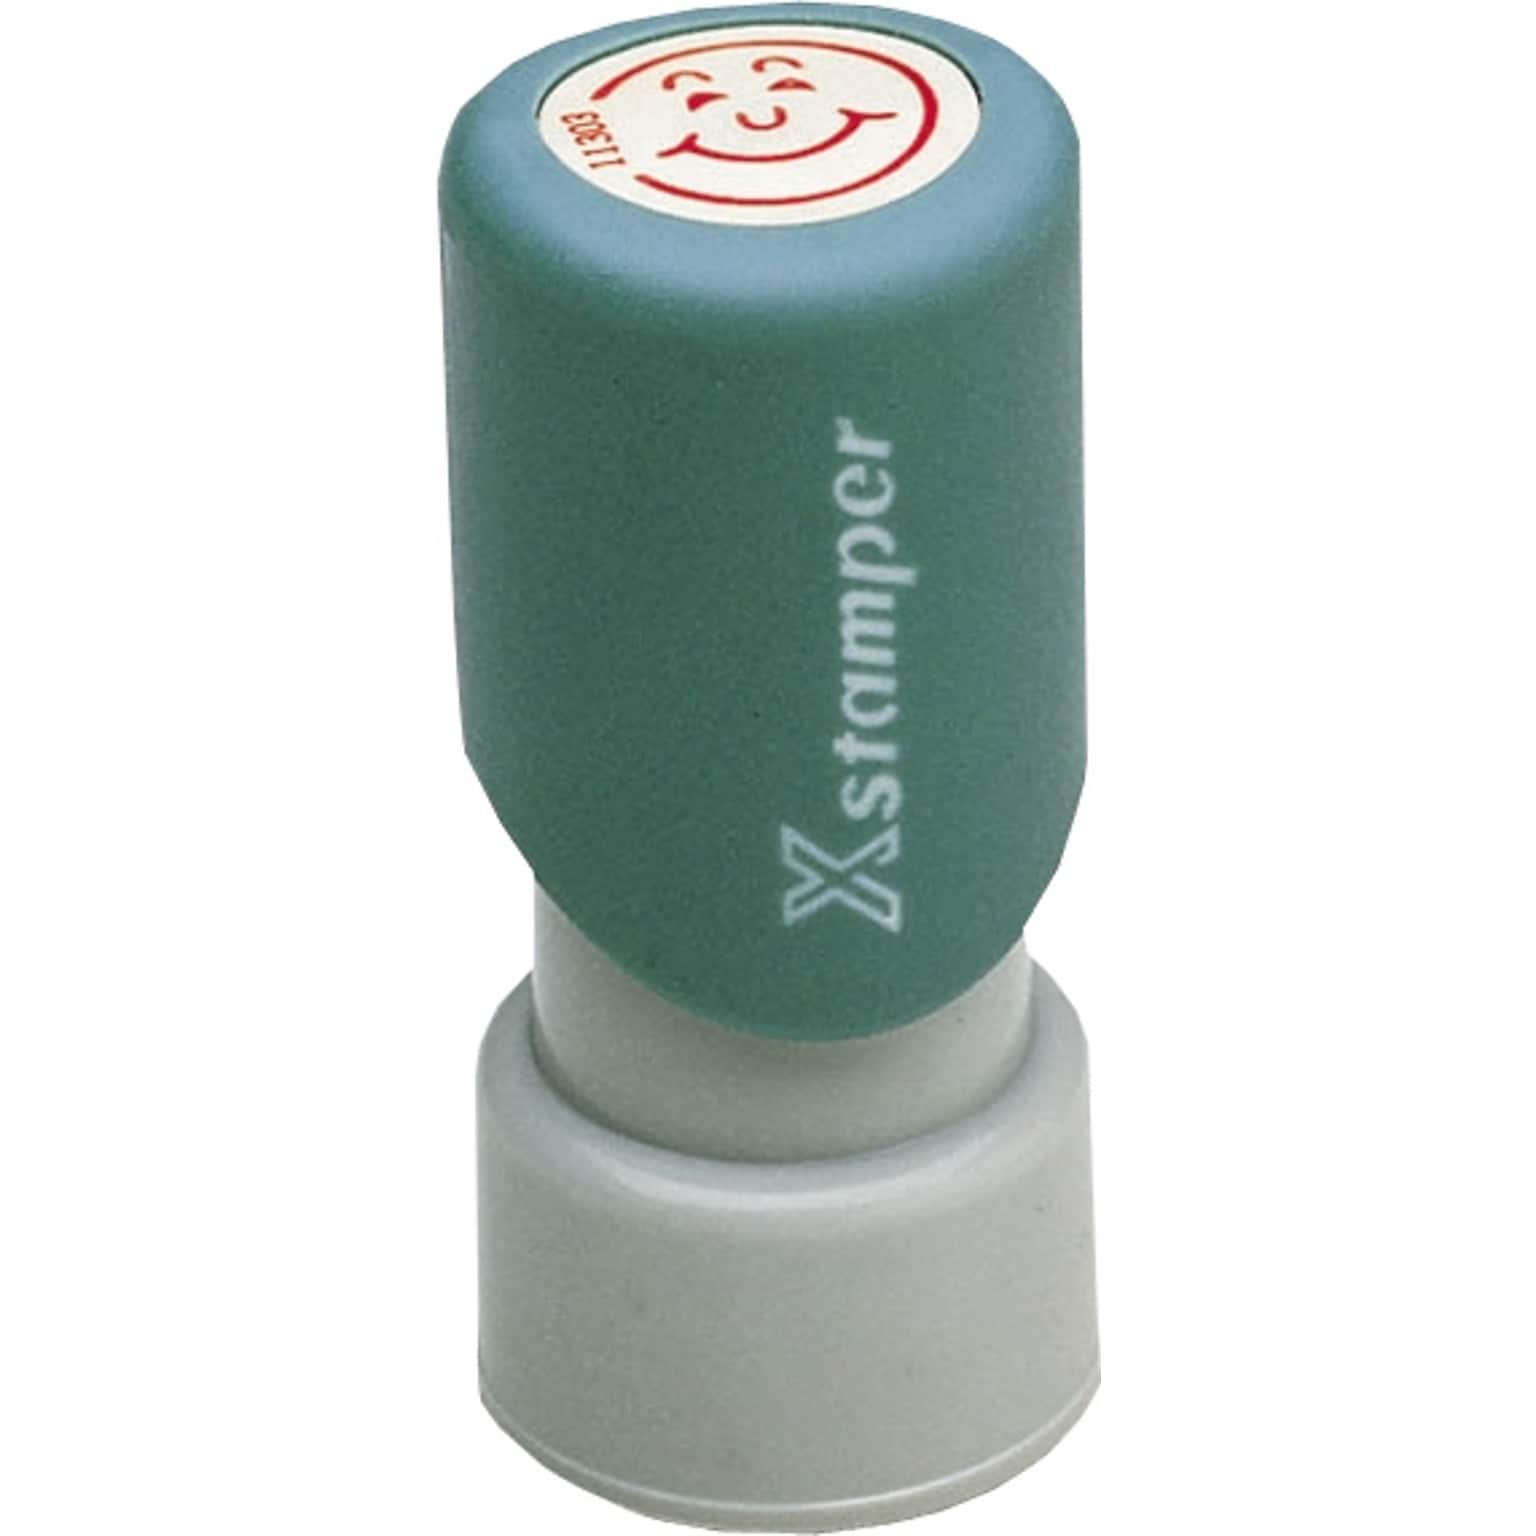 Xstamper® Pre-inked Stamps, Red Ink Happy Face (036000)